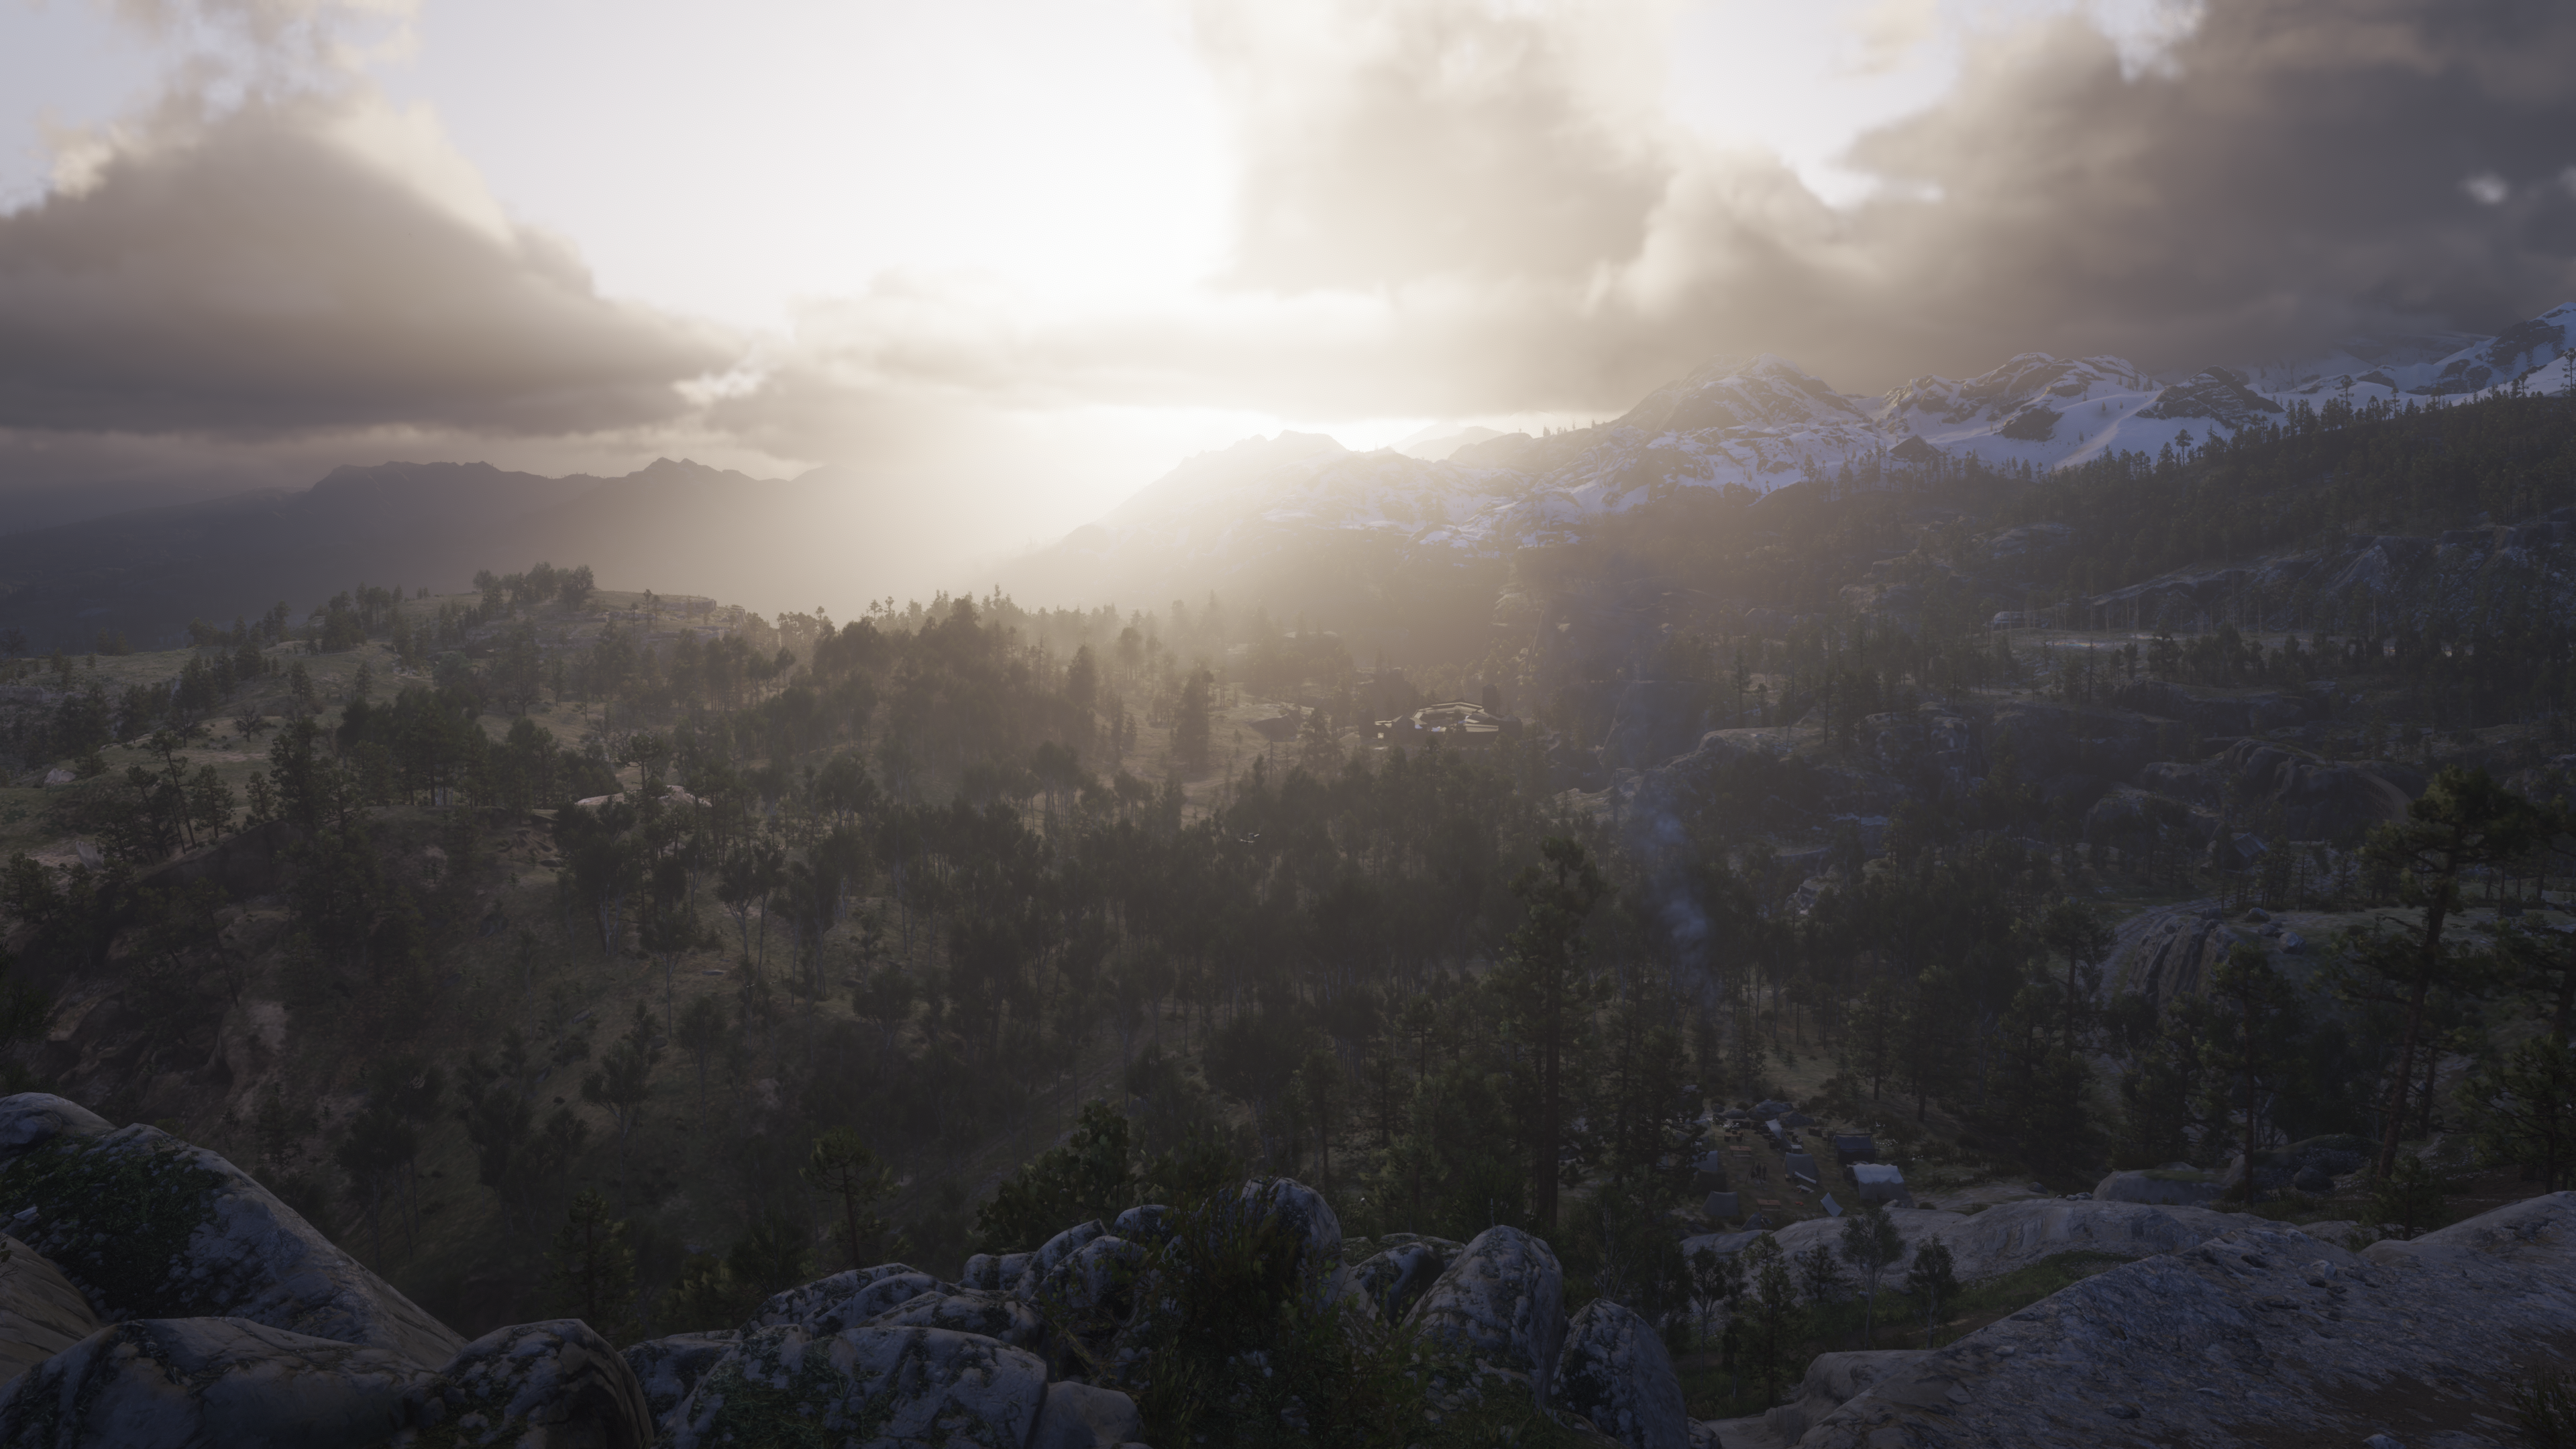 General 3840x2160 Red Dead Redemption 2 nature mountain view clouds video games landscape trees sky mountains CGI